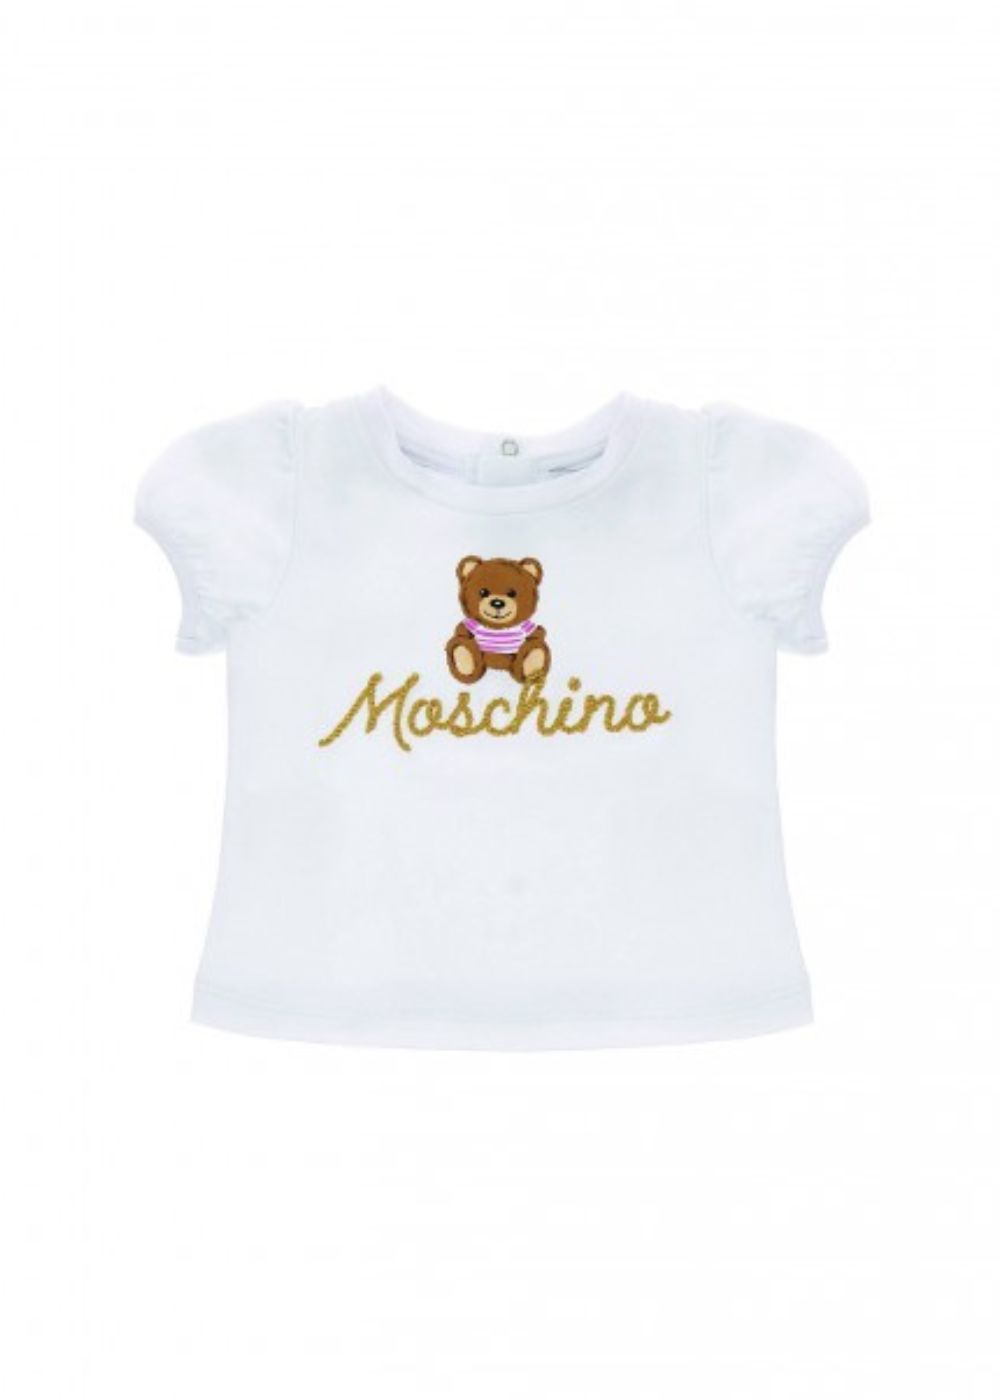 Featured image for “Moschino T-shirt con Ricamo in Oro”